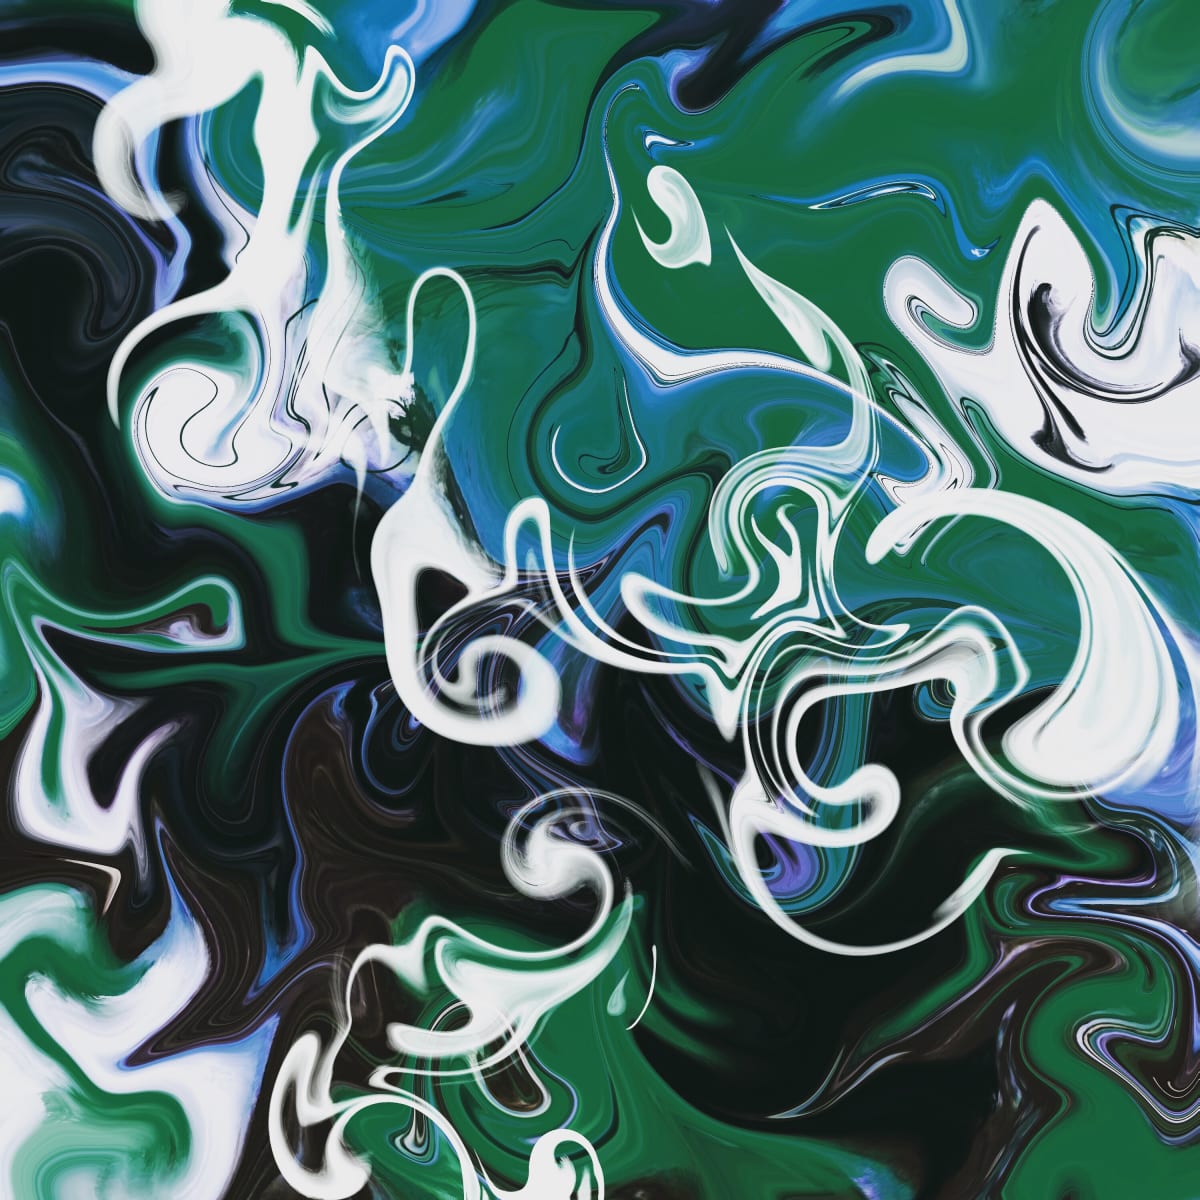 Abstract Green and White Swirls by Margo Thomas 